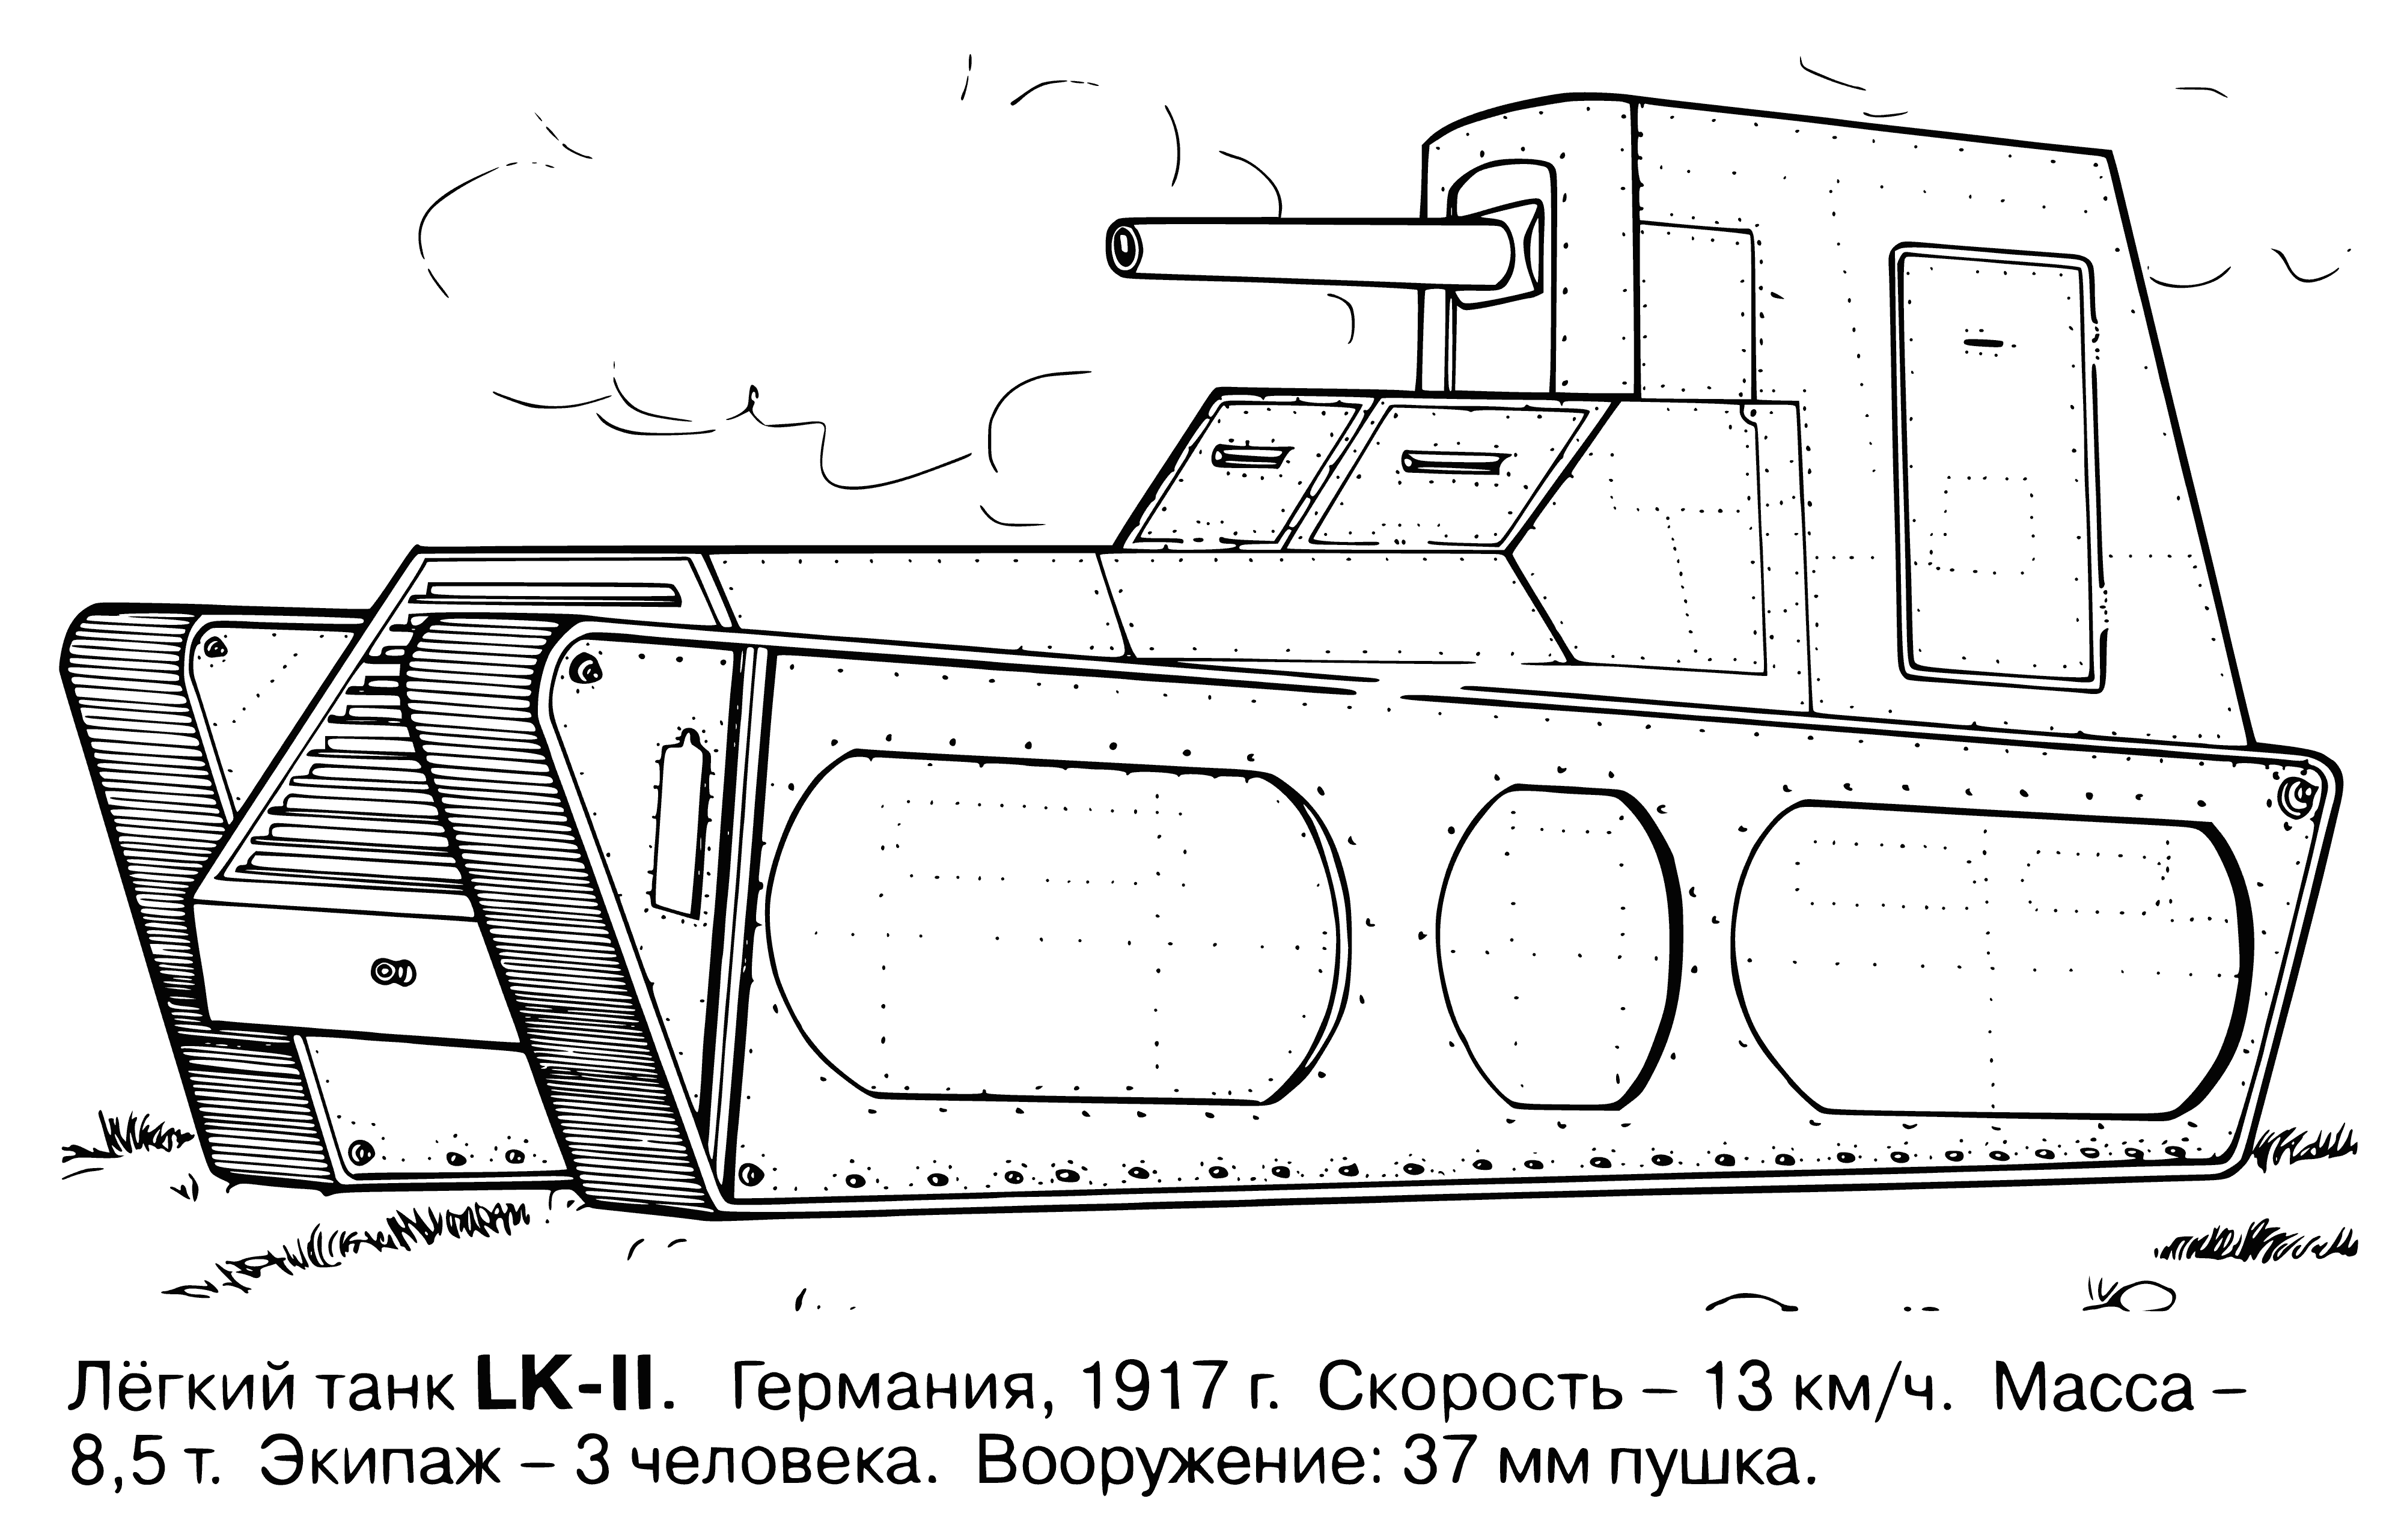 coloring page: Tank w/ light color, turret & person, moves forward.